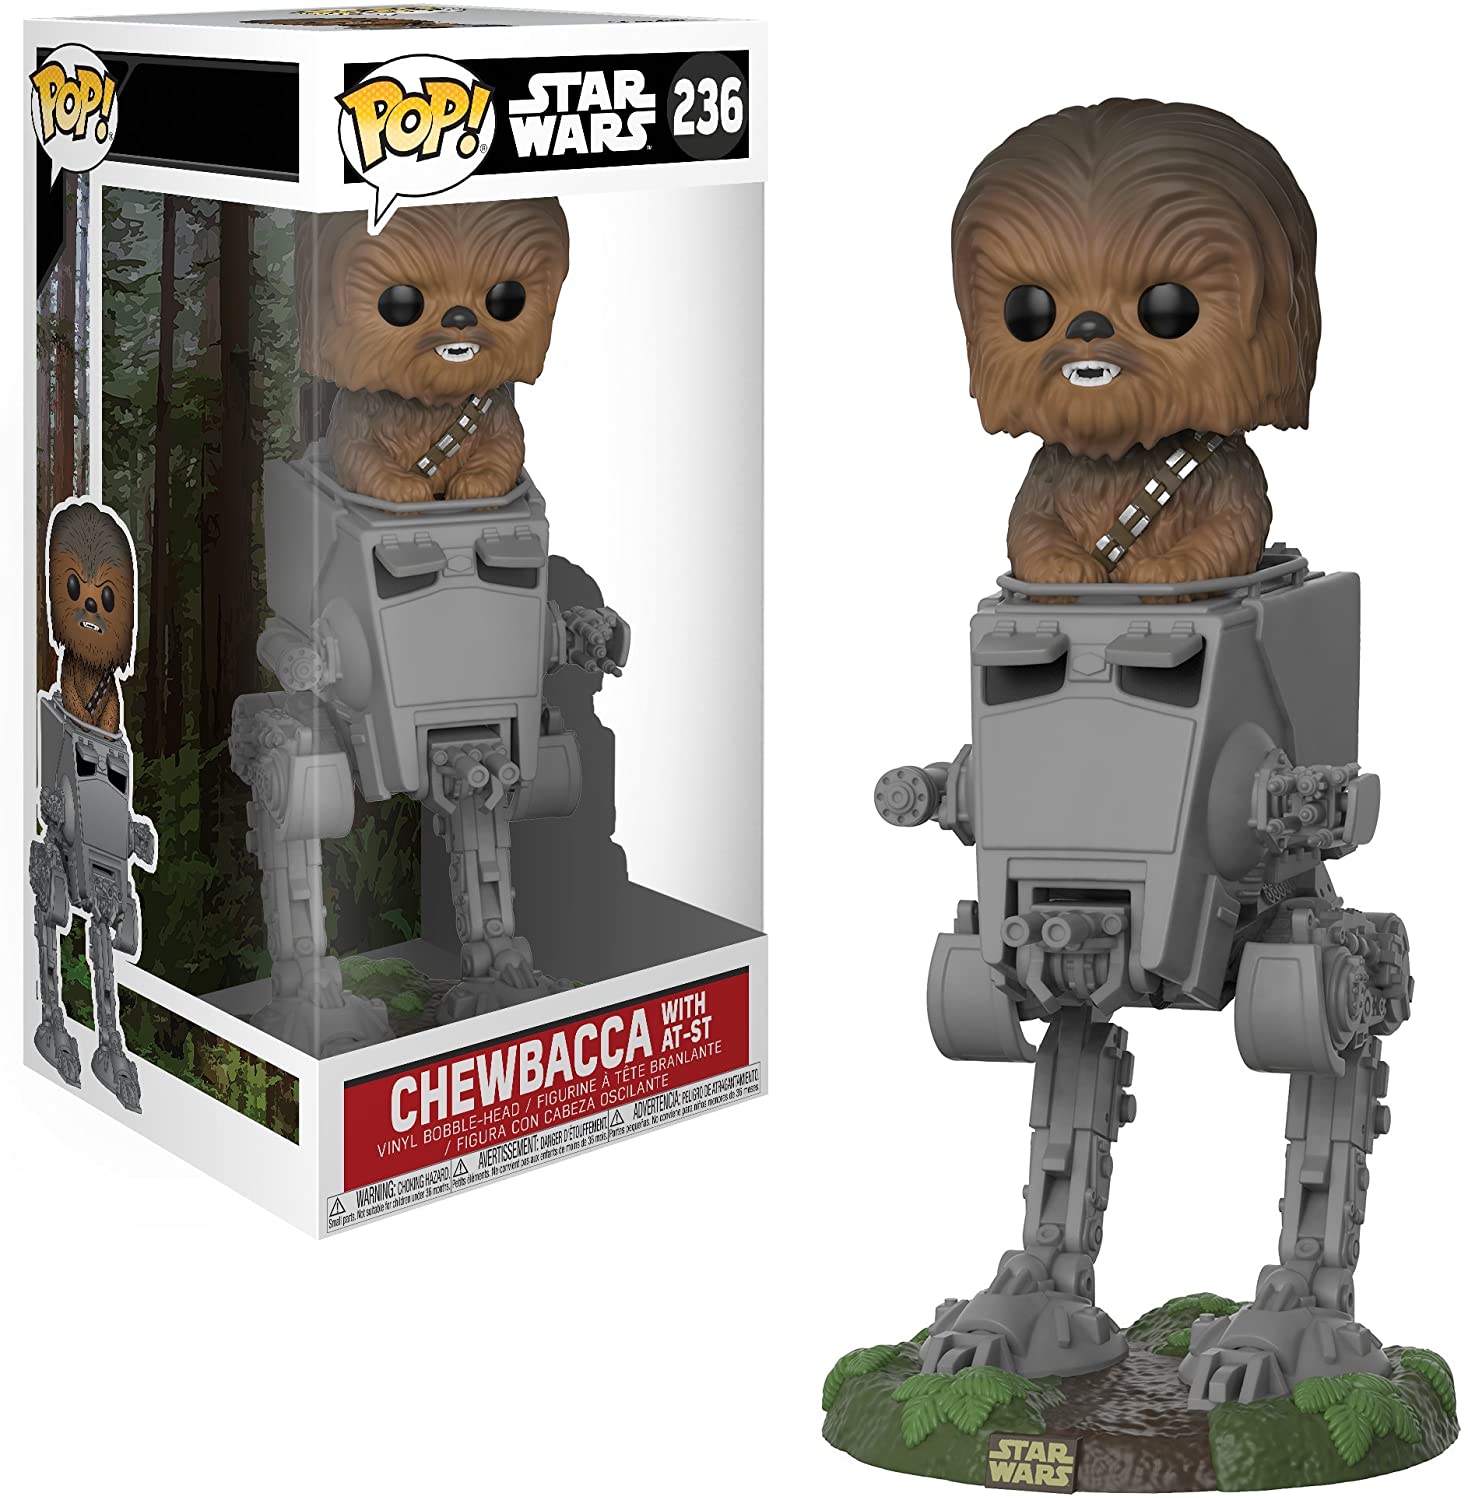 Star Wars - Chewbacca With AT-ST 236 Funko Pop